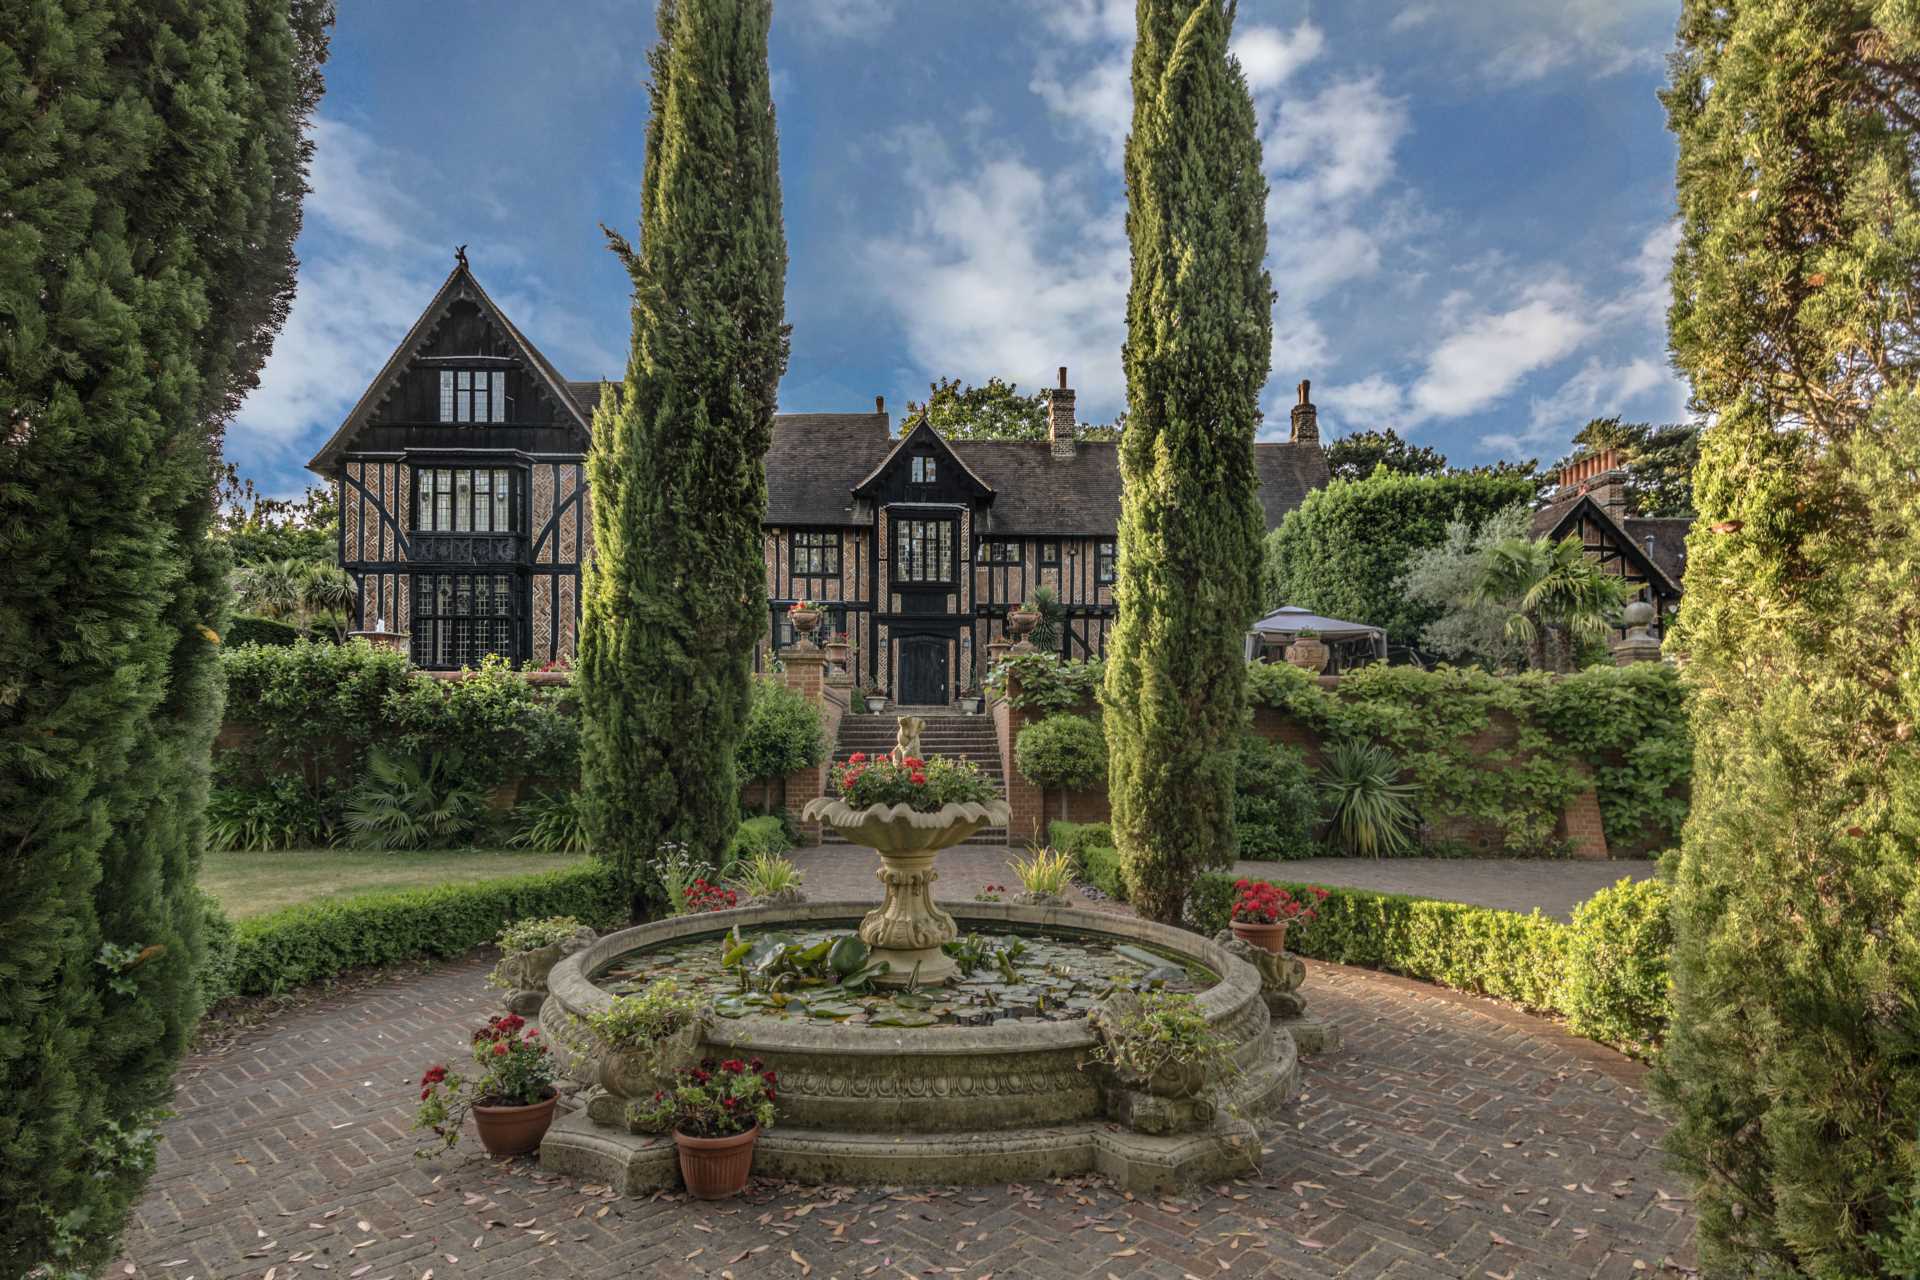 This Historic, 500-Year-Old English Manor Just Hit the Market for $17.5 Million